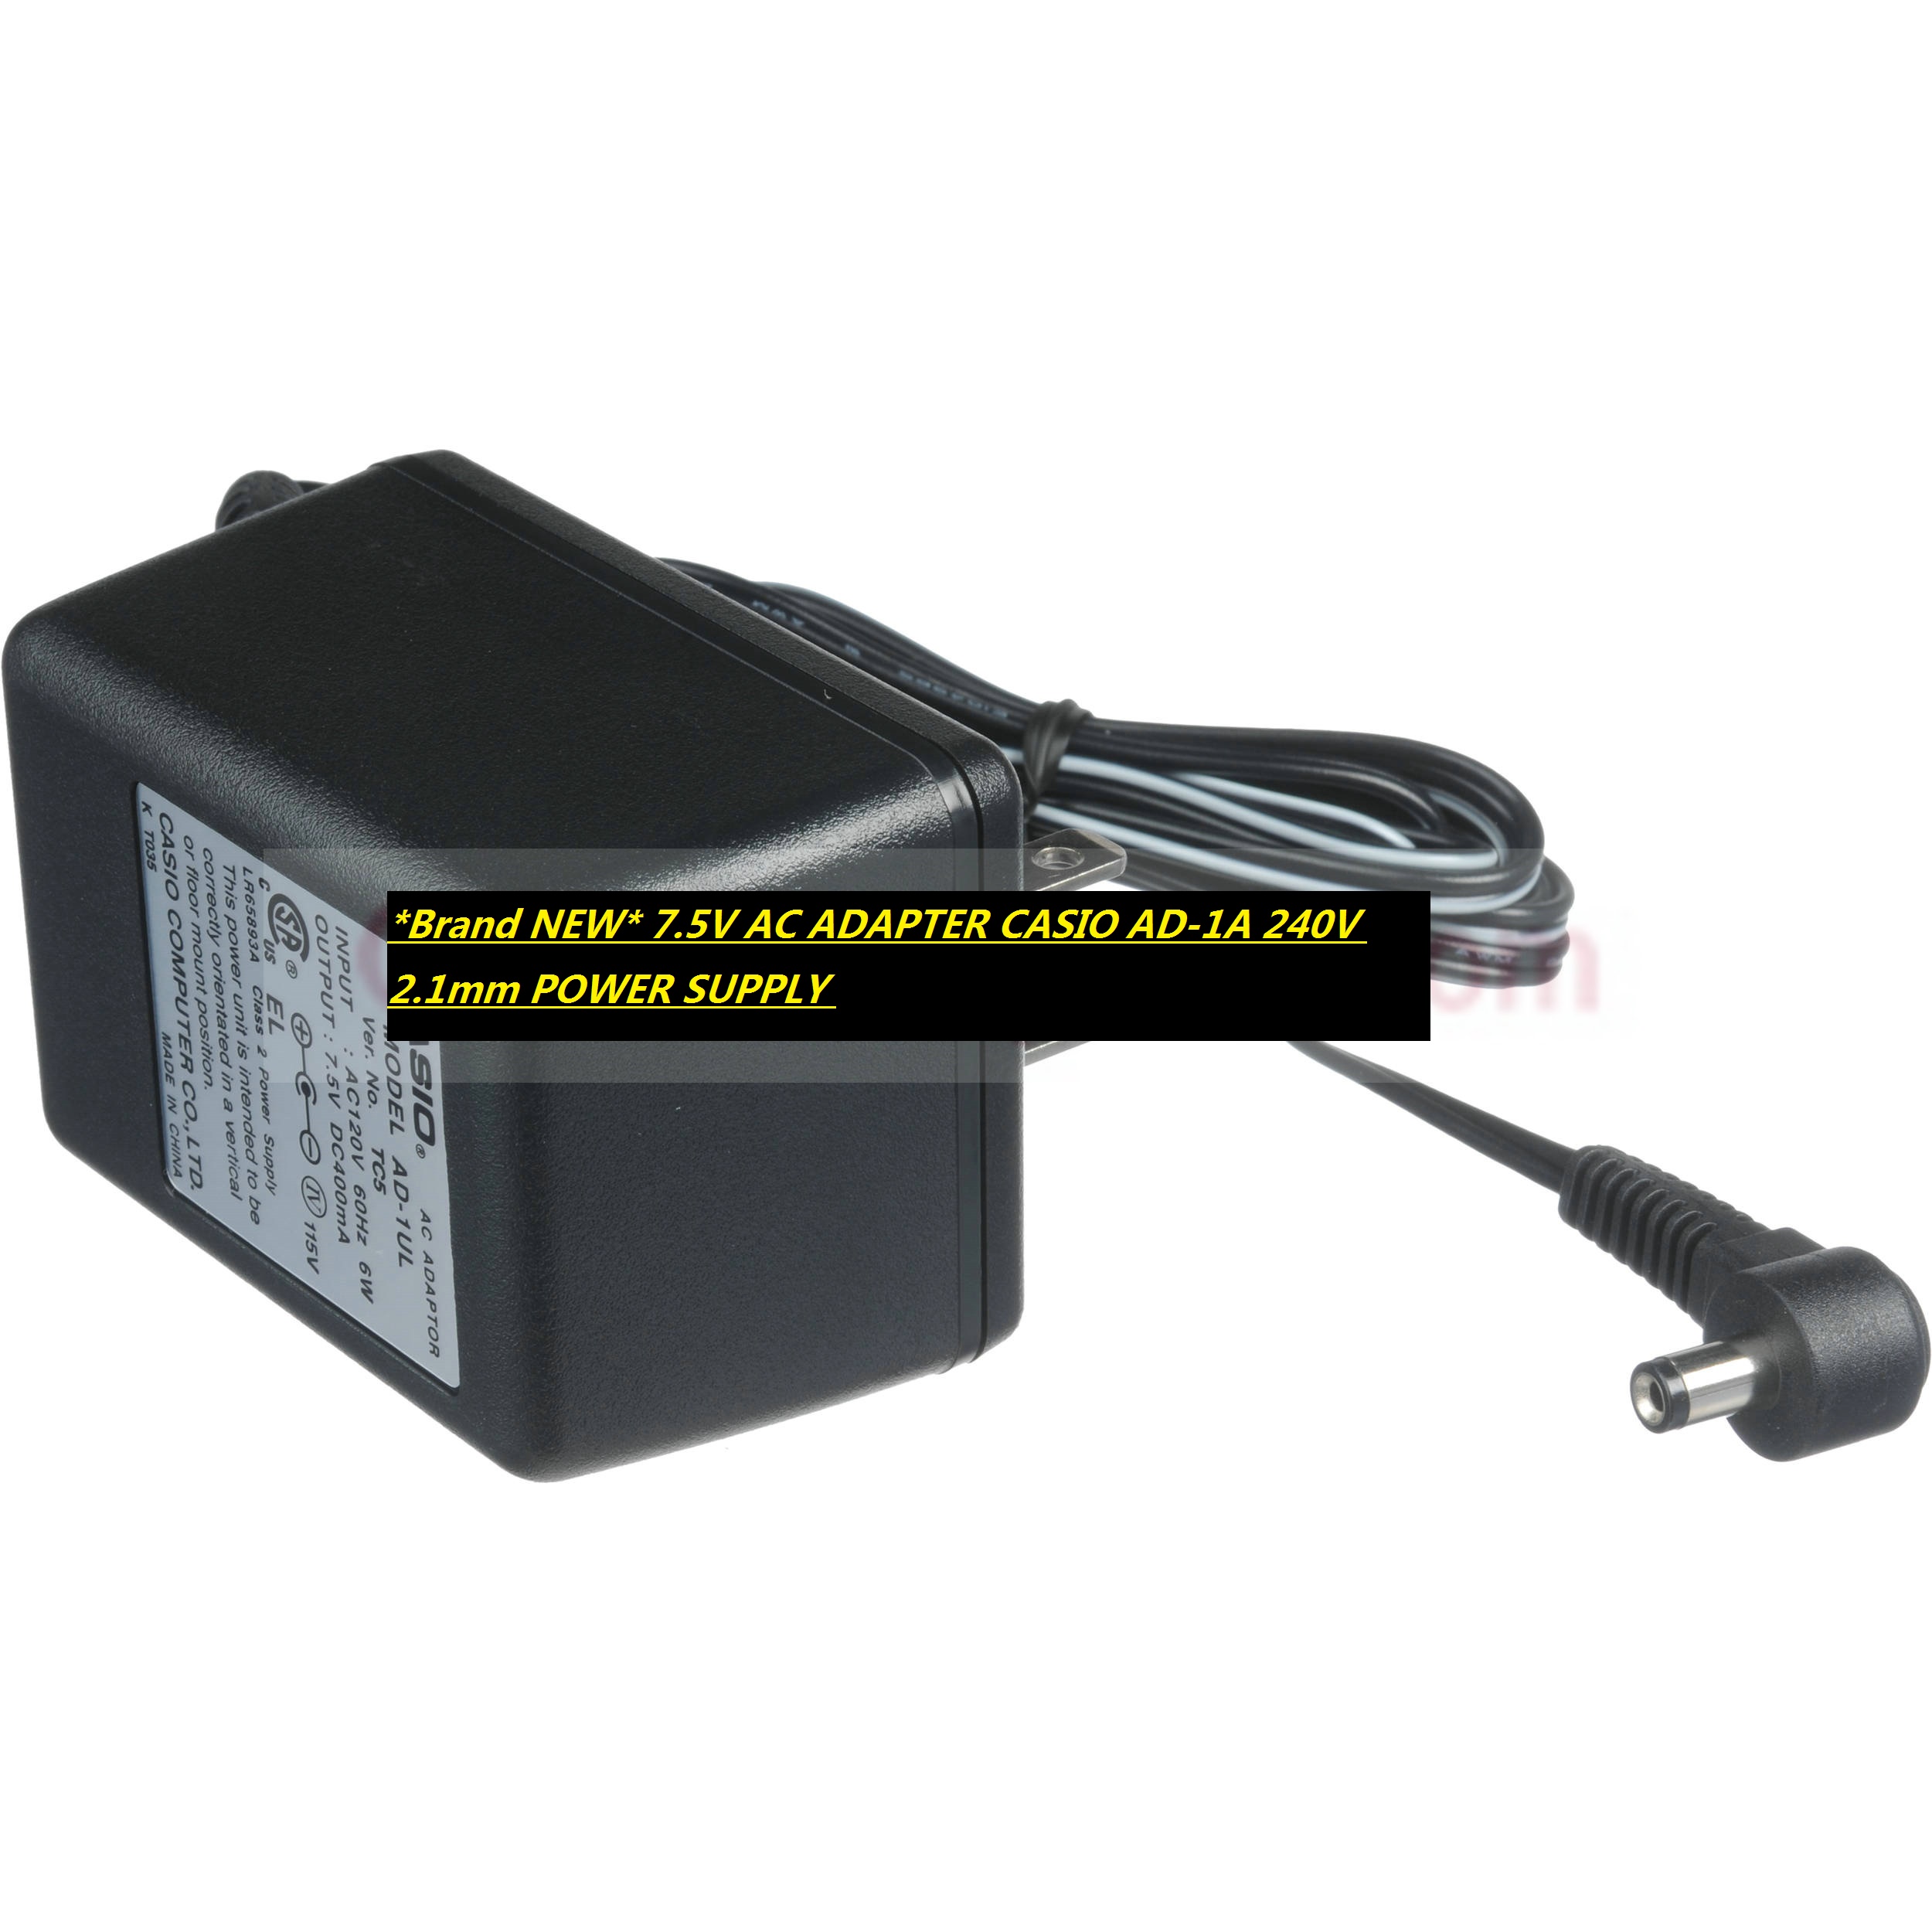 *Brand NEW* 7.5V AC ADAPTER CASIO AD-1A 240V 2.1mm POWER SUPPLY